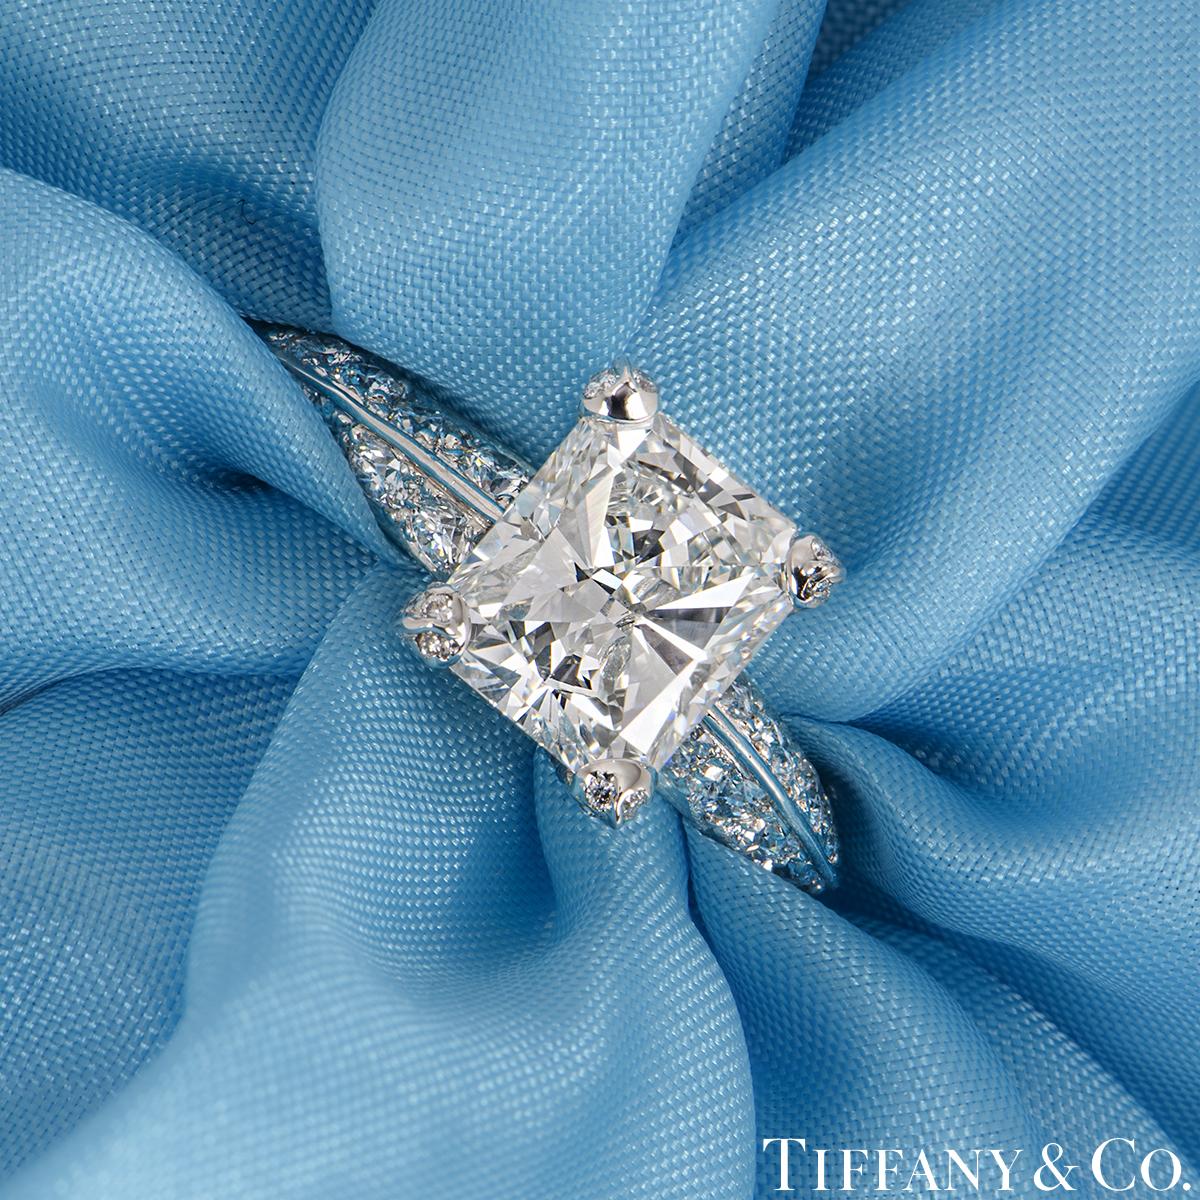 Women's Tiffany & Co. Platinum Radiant Diamond Engagement Ring 2.01ct G/IF GIA Certified